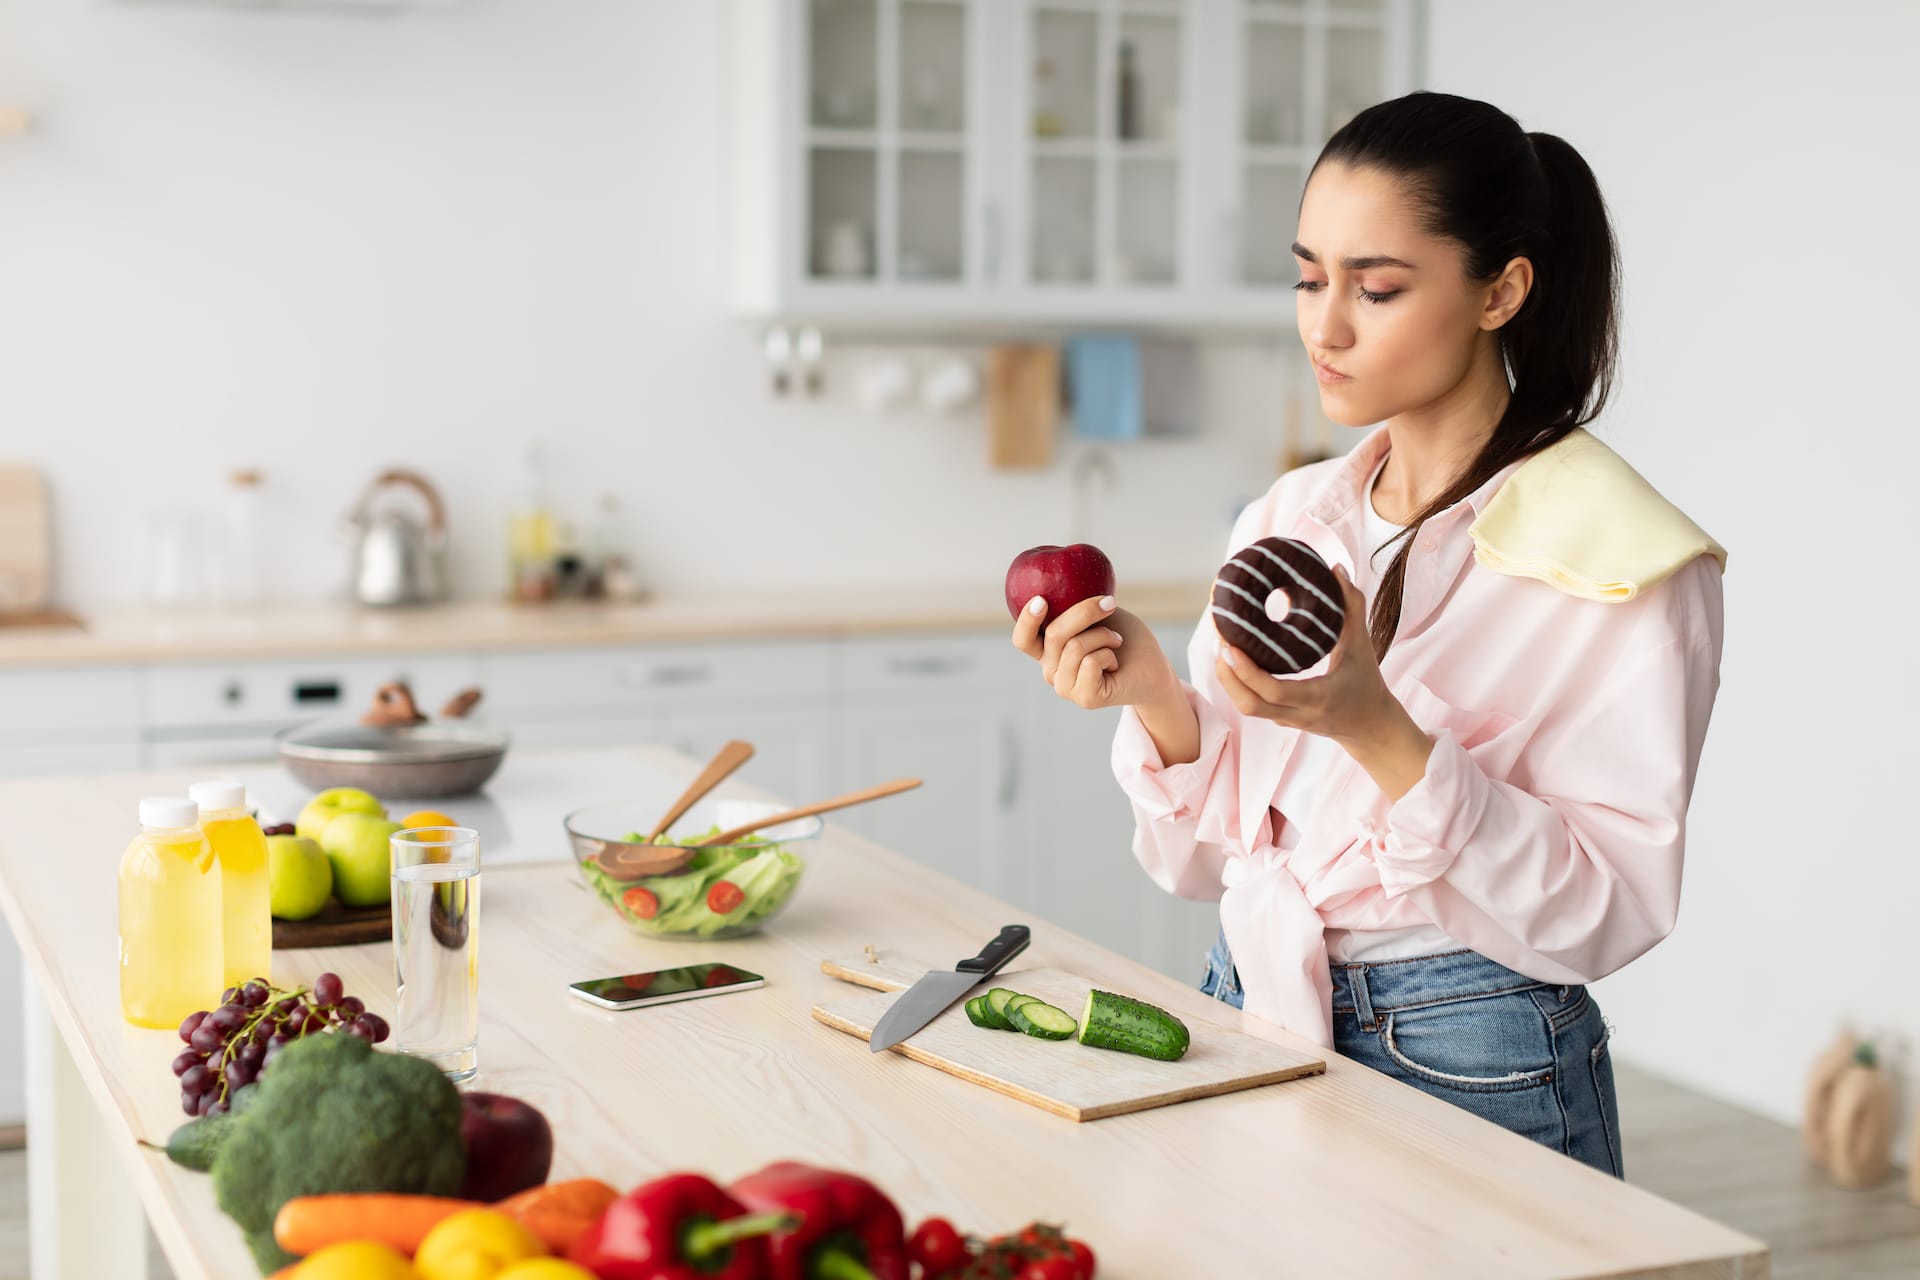 Pretty pensive lady holding red apple and doughnut in her hands, looking at fruit. Young woman with sugar addiction wants to eat dessert but choosing good meal over unhealthy one